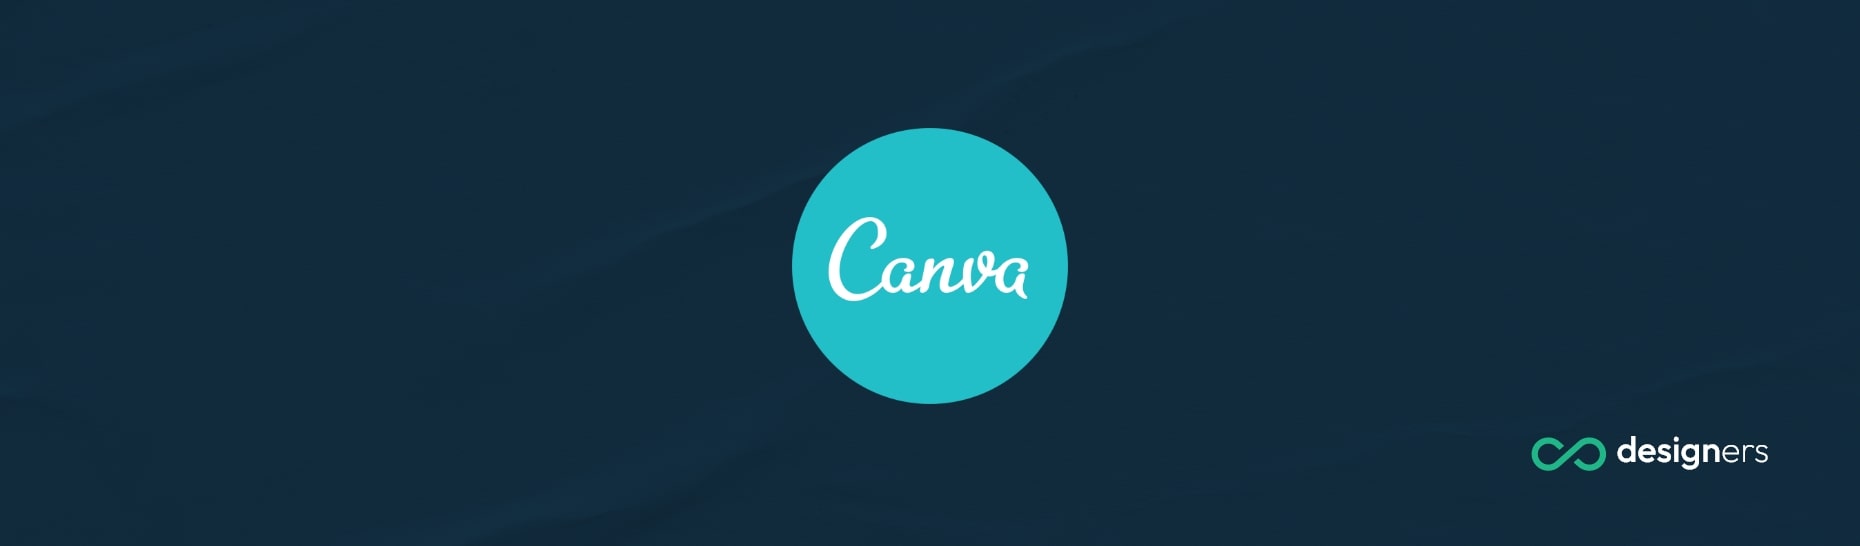 What Is the Most Popular Font on Canva?